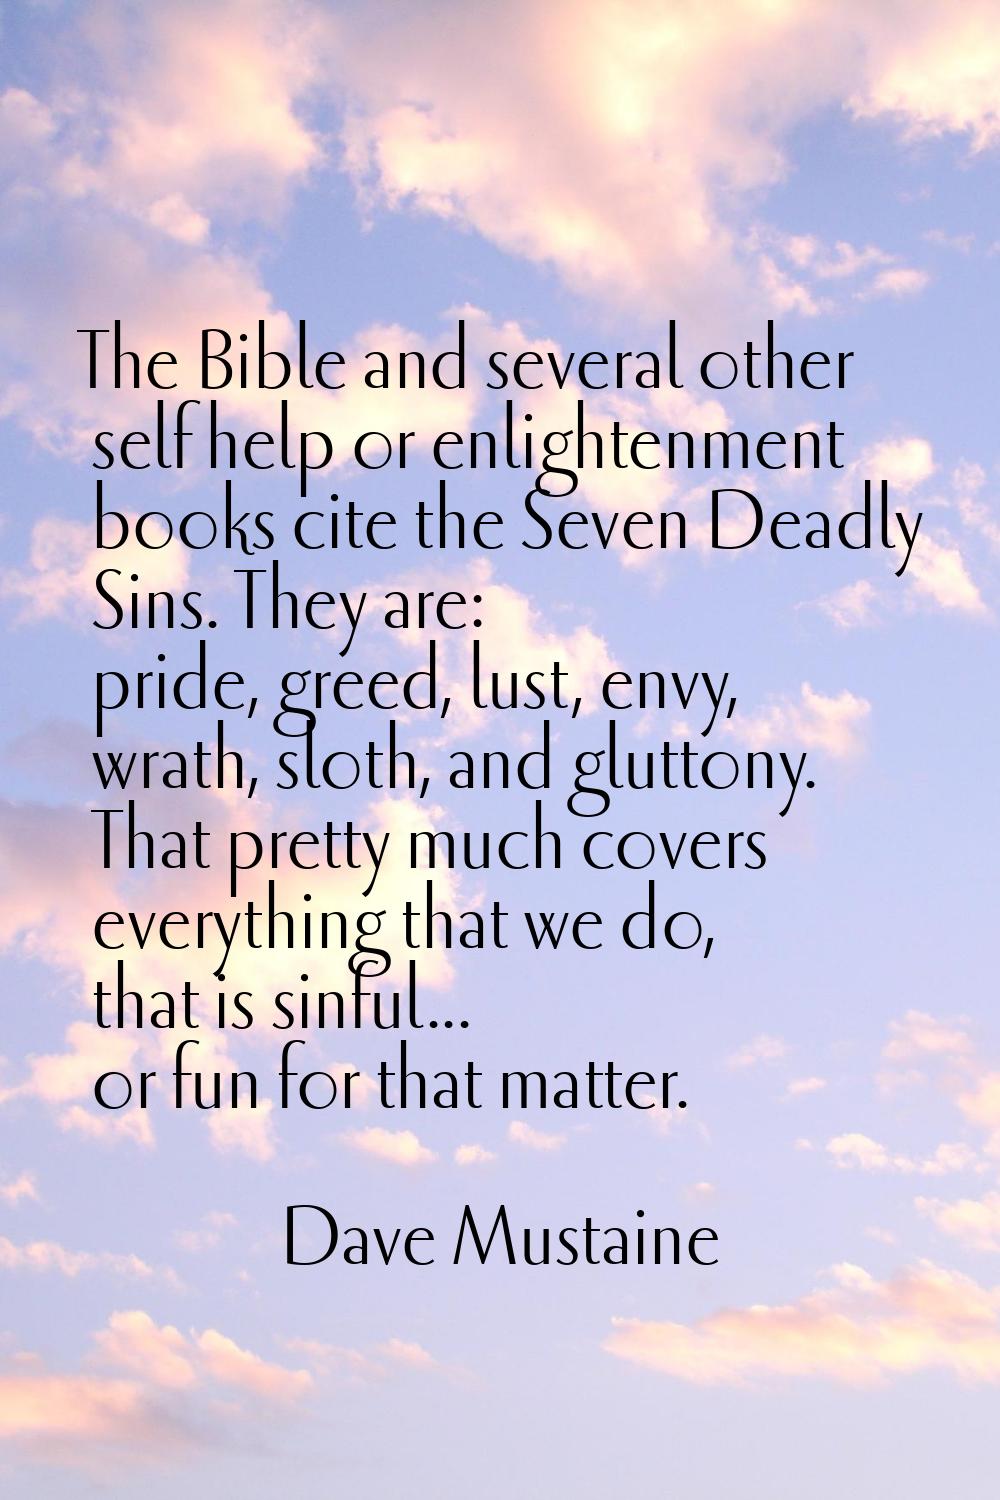 The Bible and several other self help or enlightenment books cite the Seven Deadly Sins. They are: 